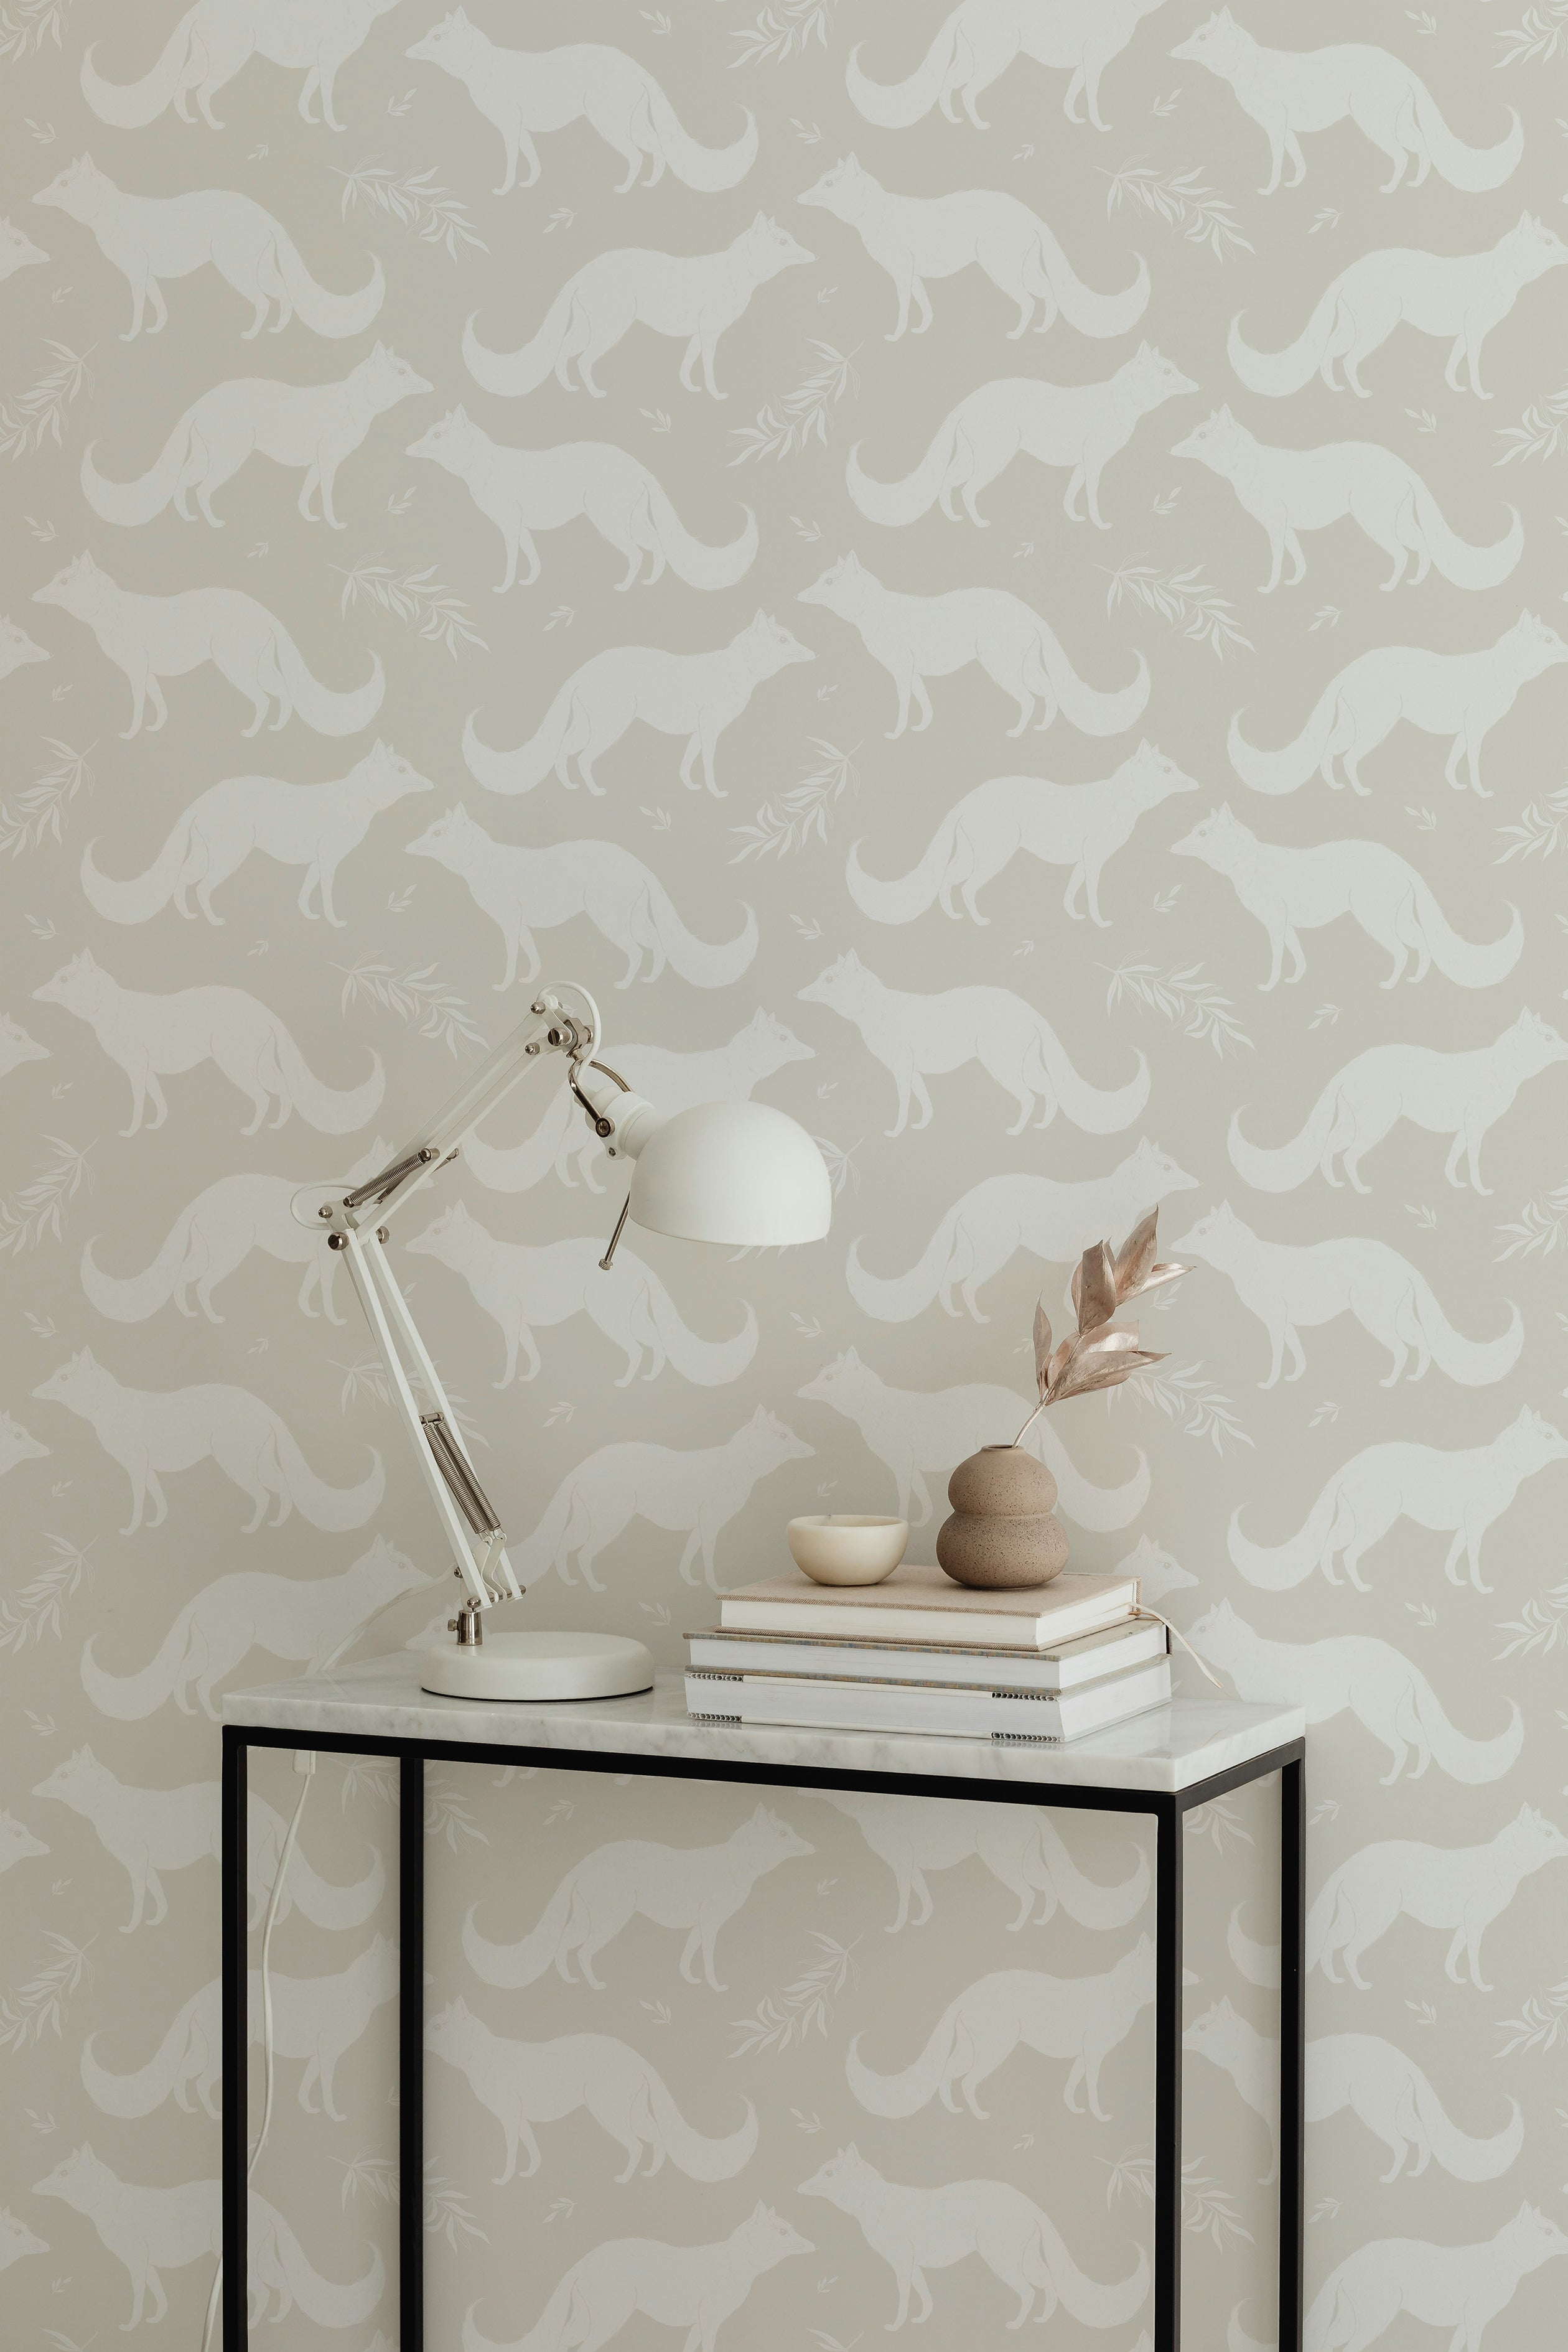 A minimalist workspace with a white desk lamp and a stack of books on a table in front of a warm beige wallpaper adorned with white foxes and delicate foliage patterns, adding a touch of nature to the room.